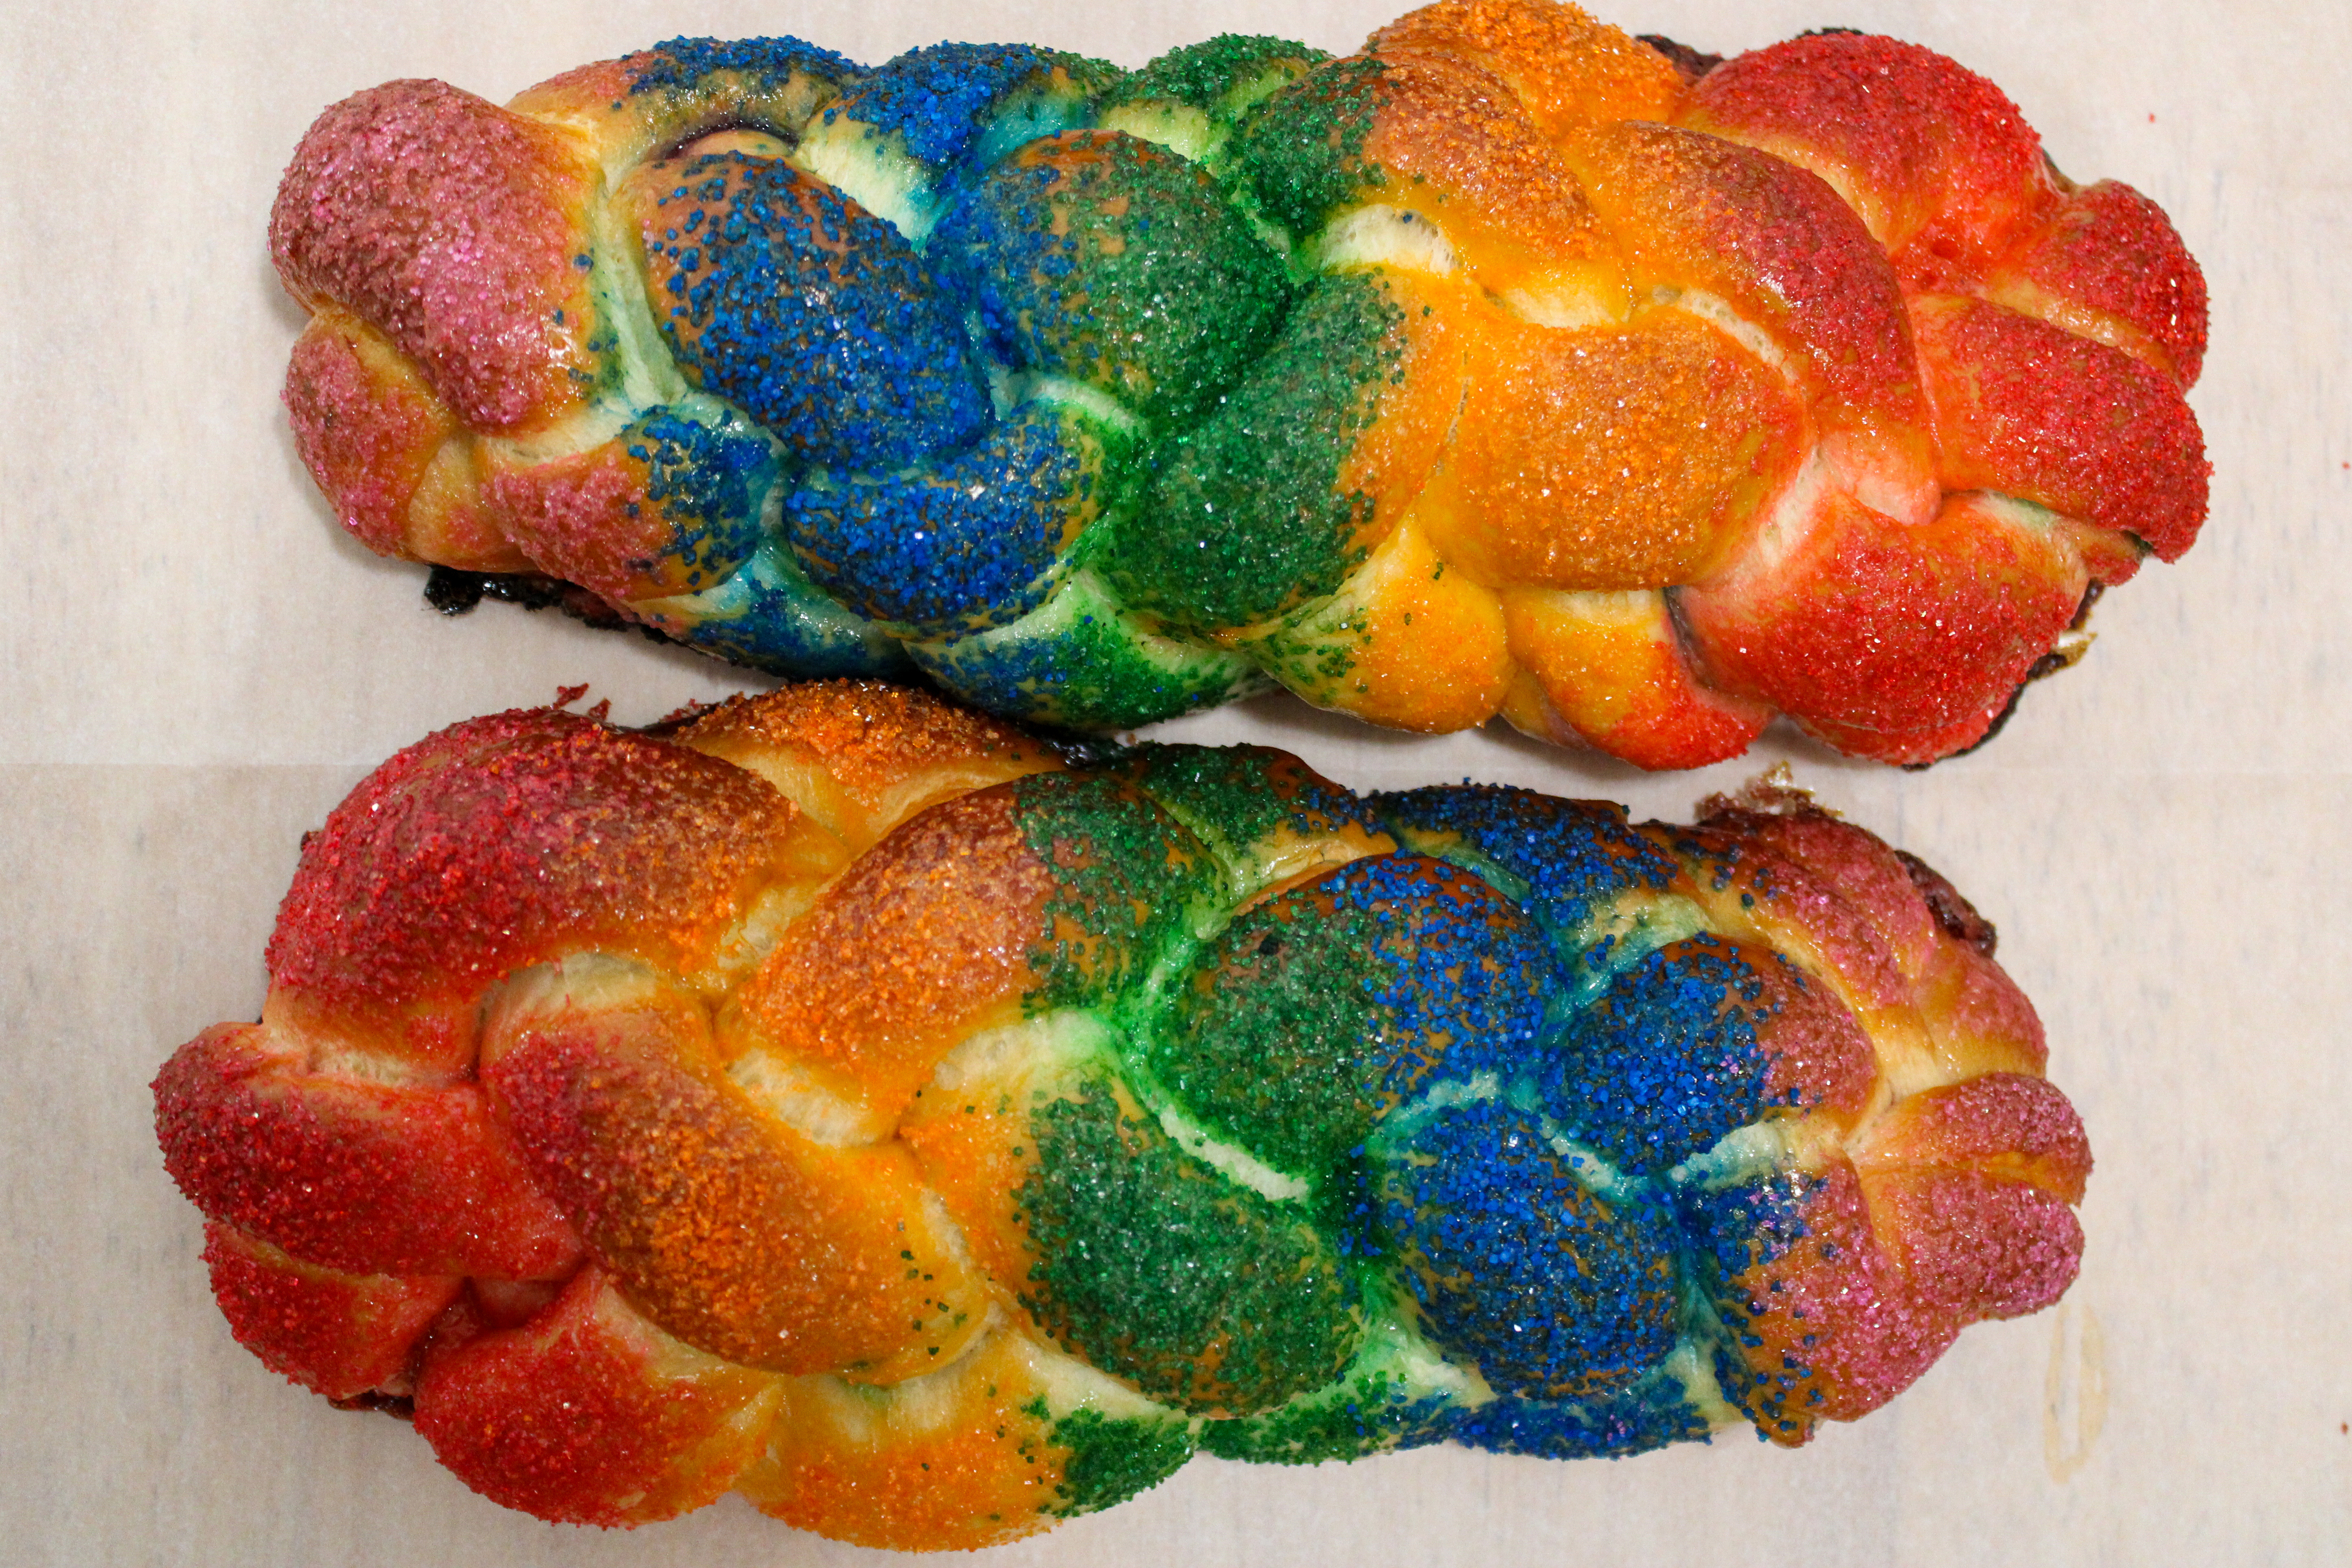 Two loaves of challah, a braided bread, are covered in sparkly rainbow topping.